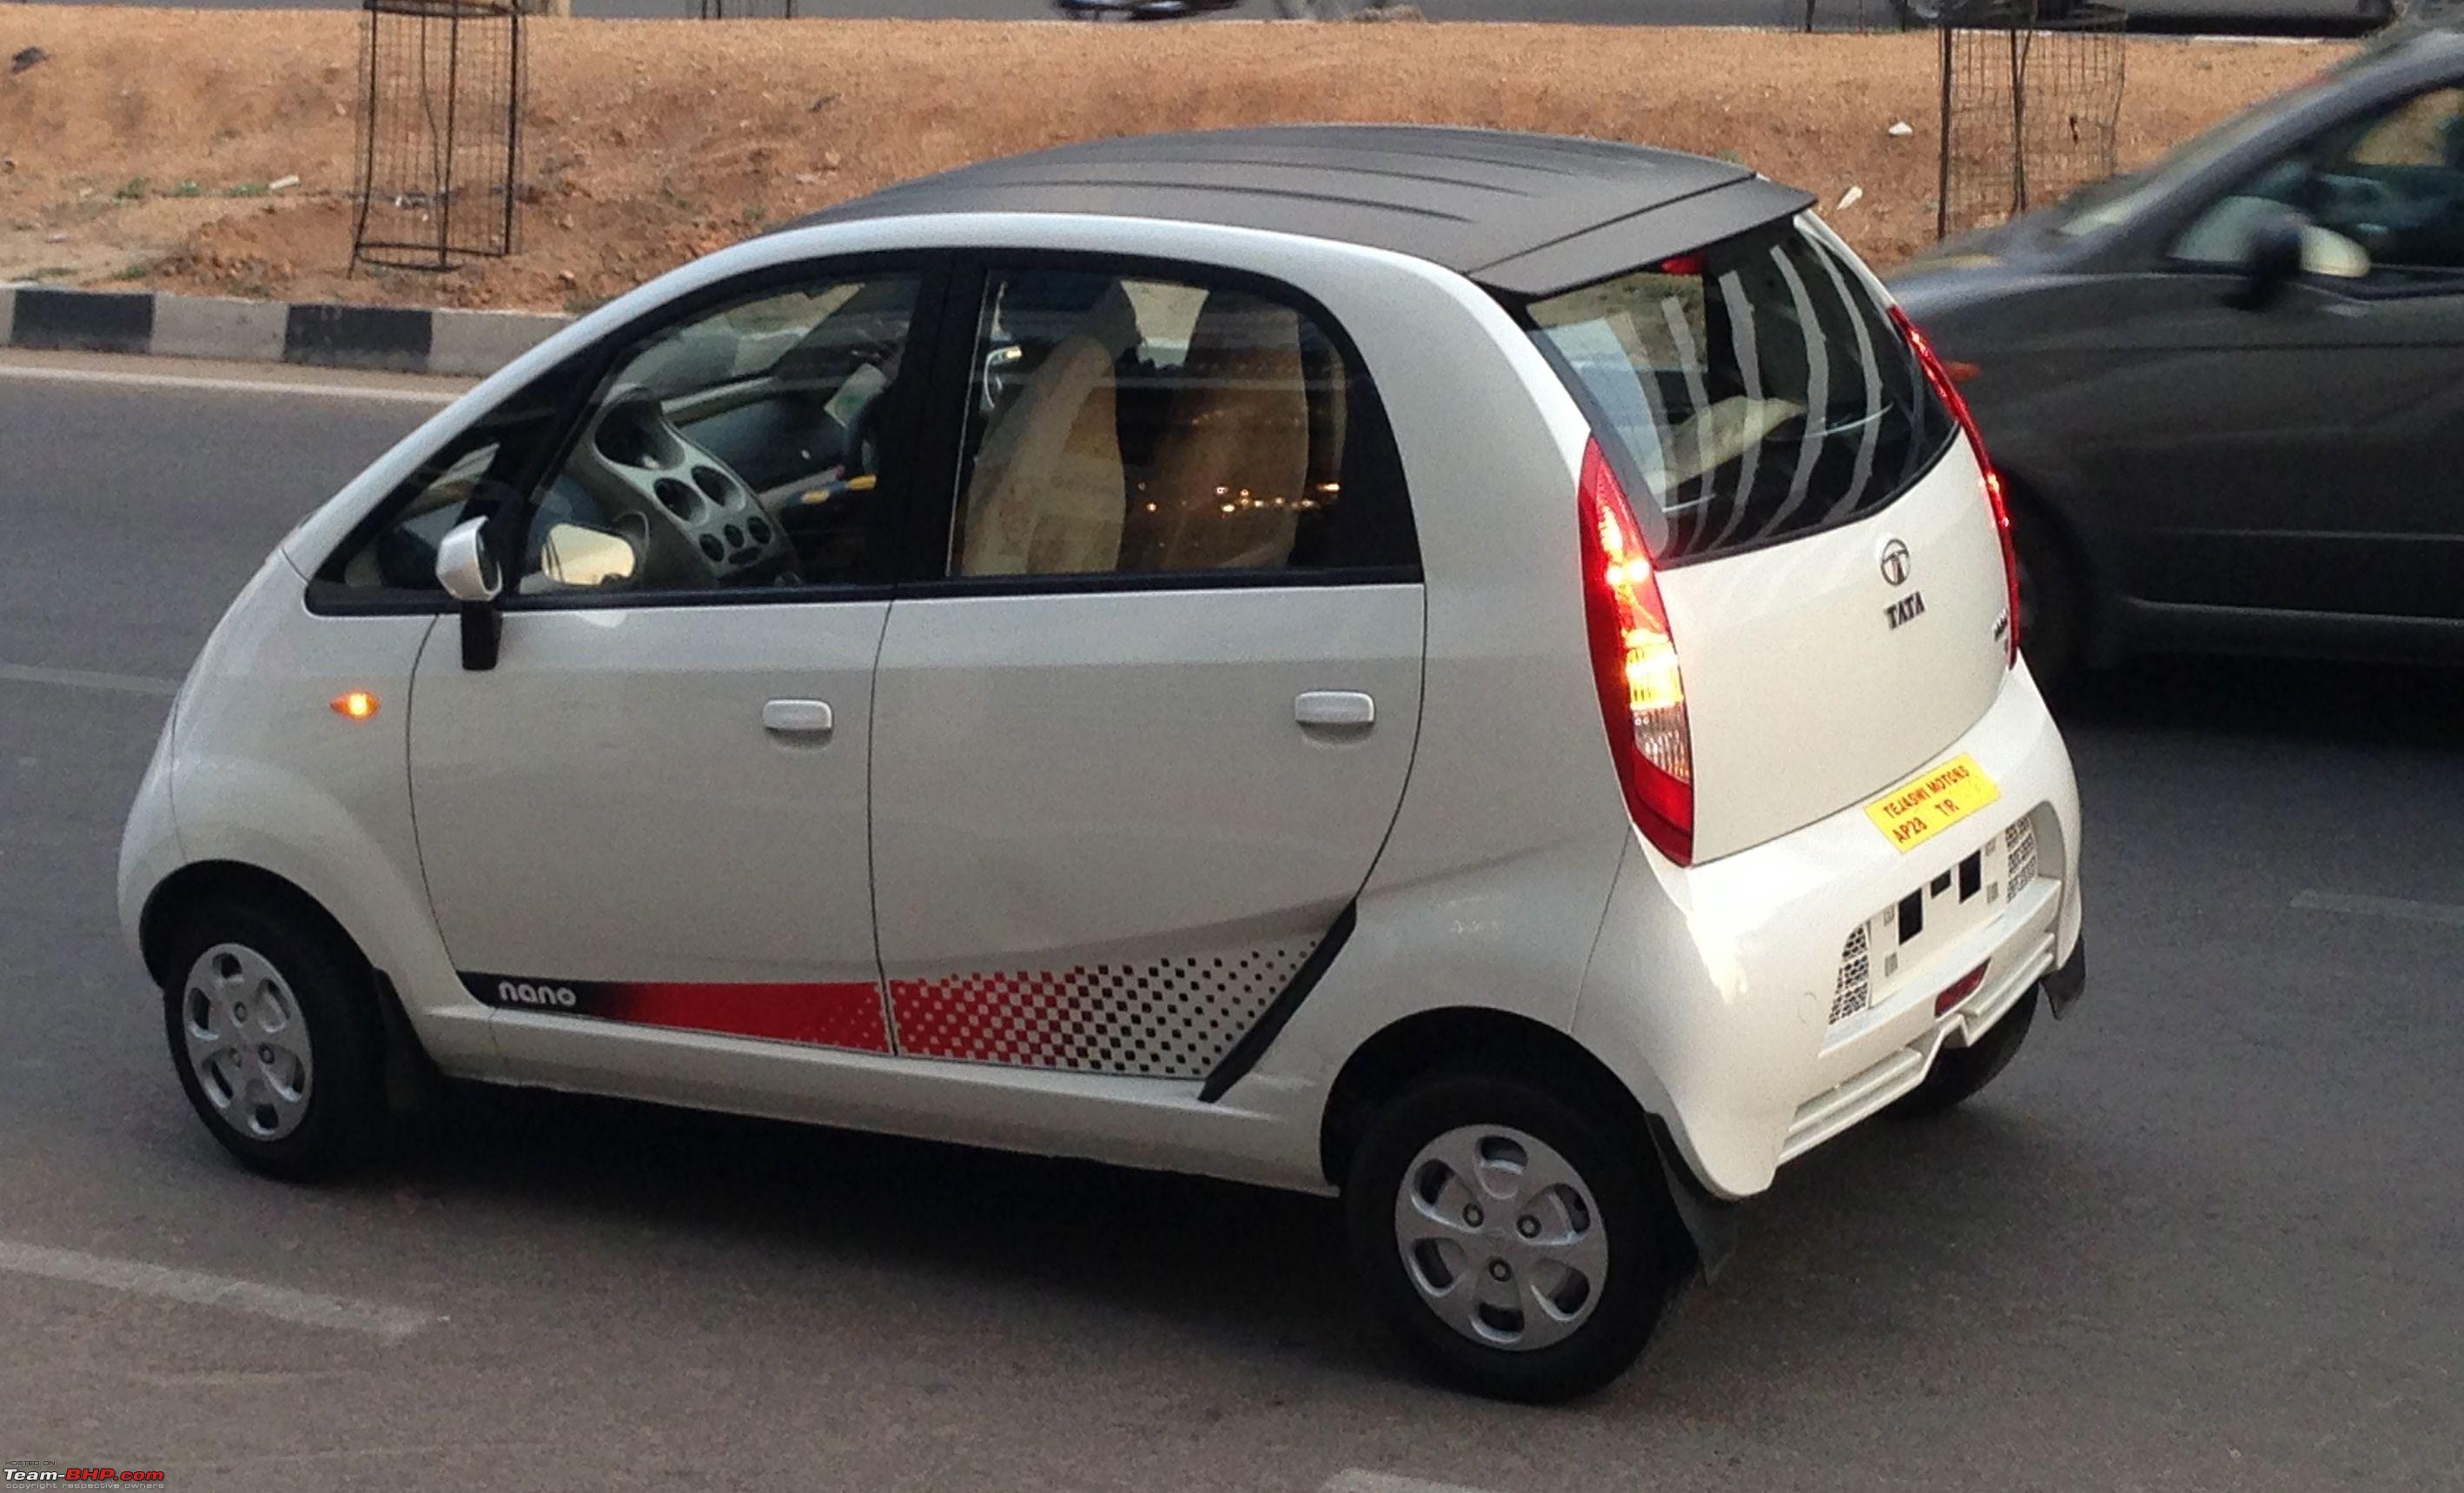 Tata Nano is the Cheapest Car of World Still Low on Trade